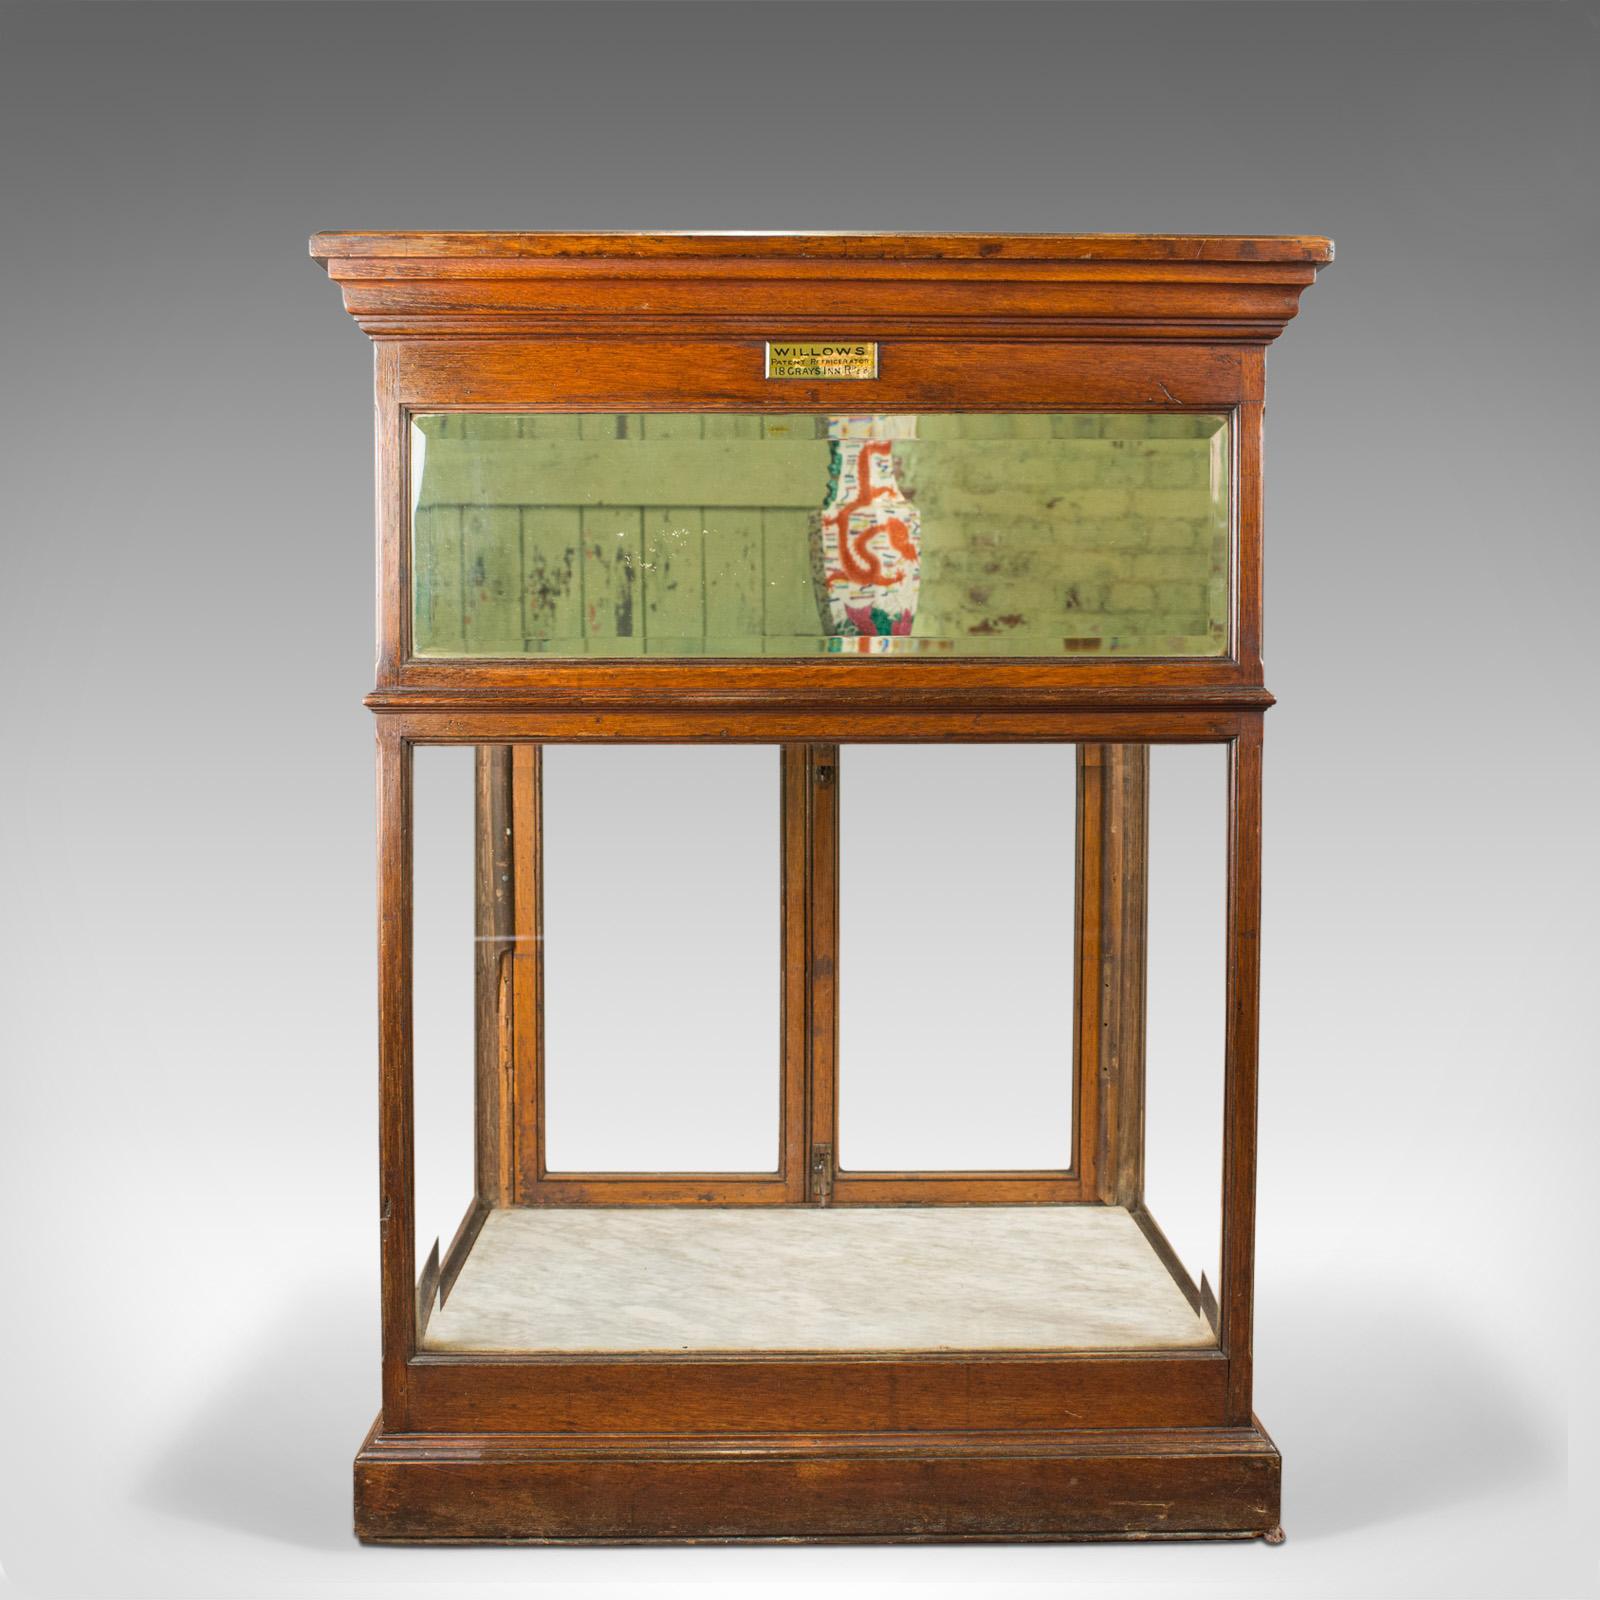 This is an antique shop display cabinet, crafted in England by Edward Willows from mahogany, glass and marble. First patented in the late 19th century, this improved model dates to circa 1905.

Of quality craftsmanship in mahogany, displaying a